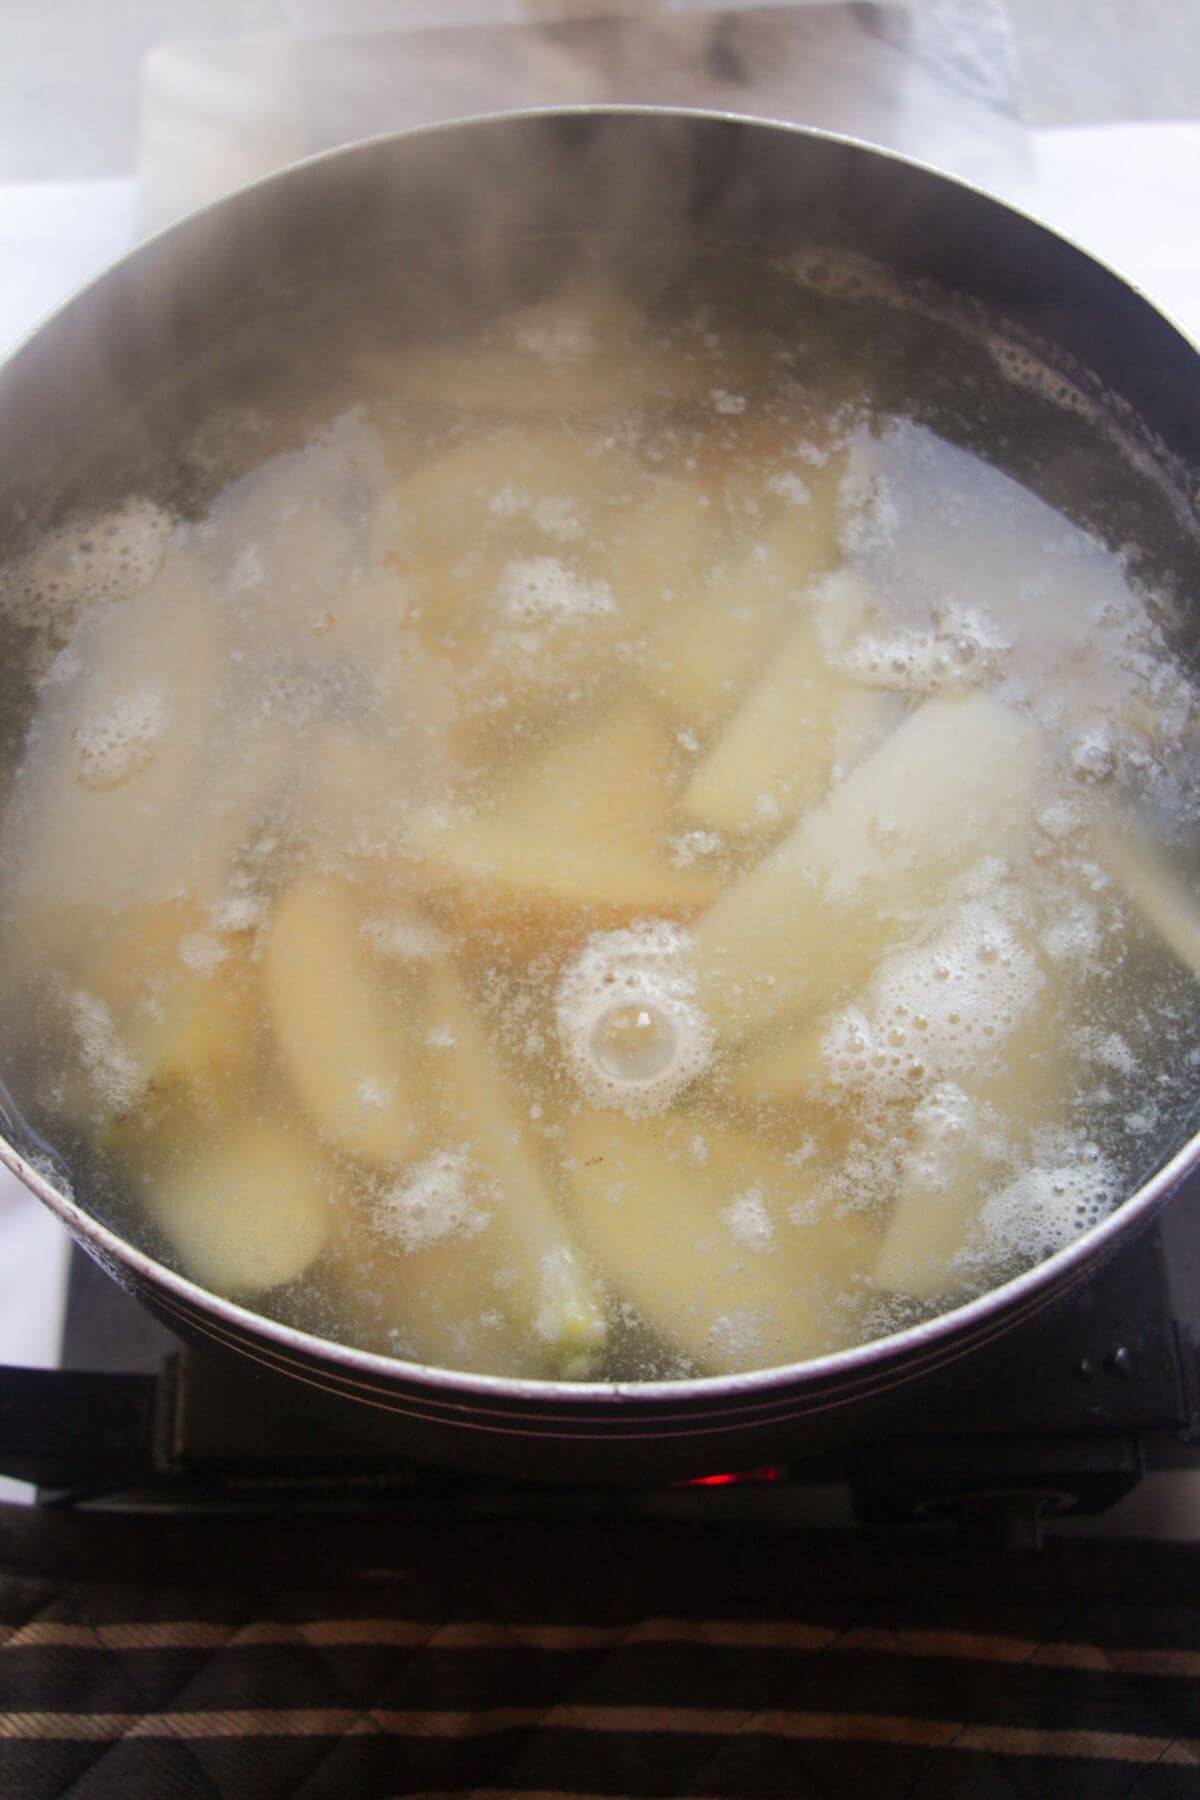 Chopped potato wedges simmering in a large black pot.